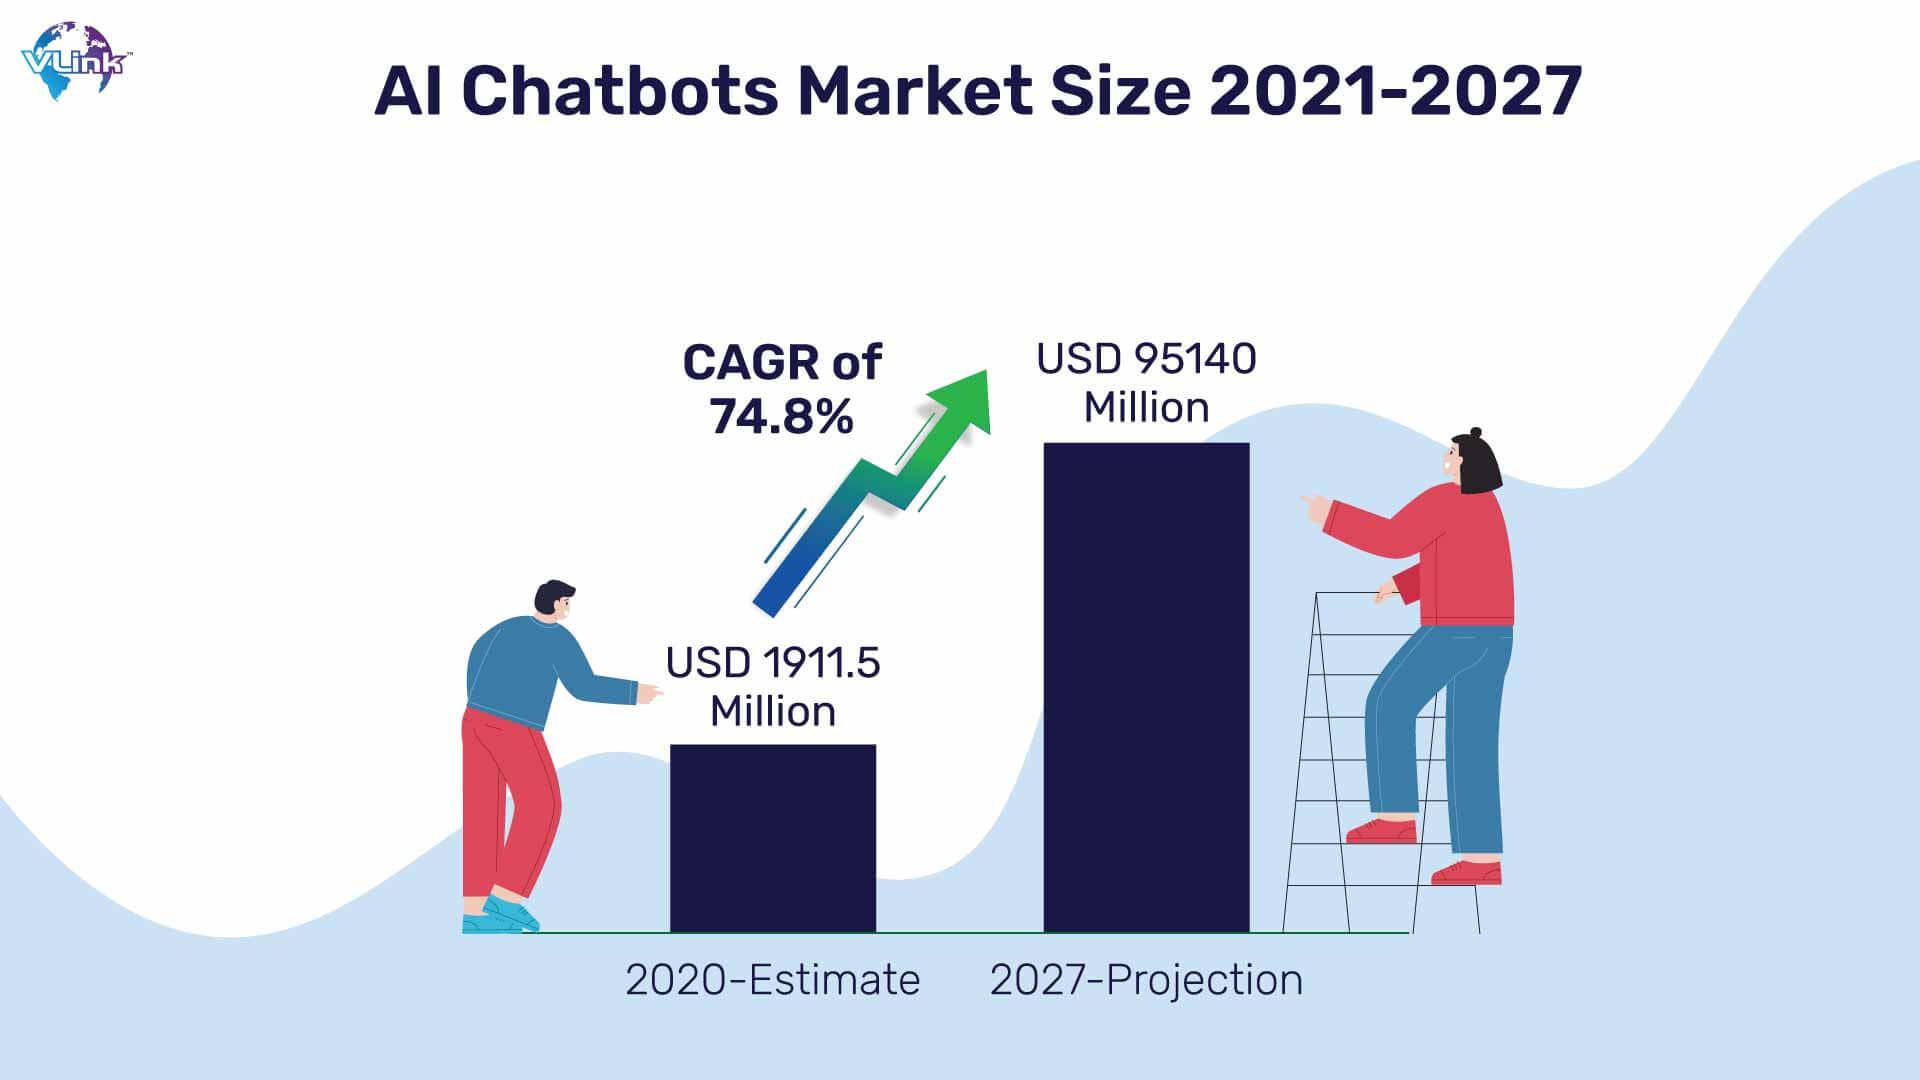 The market size of AI chatbot from 2021 to 2027